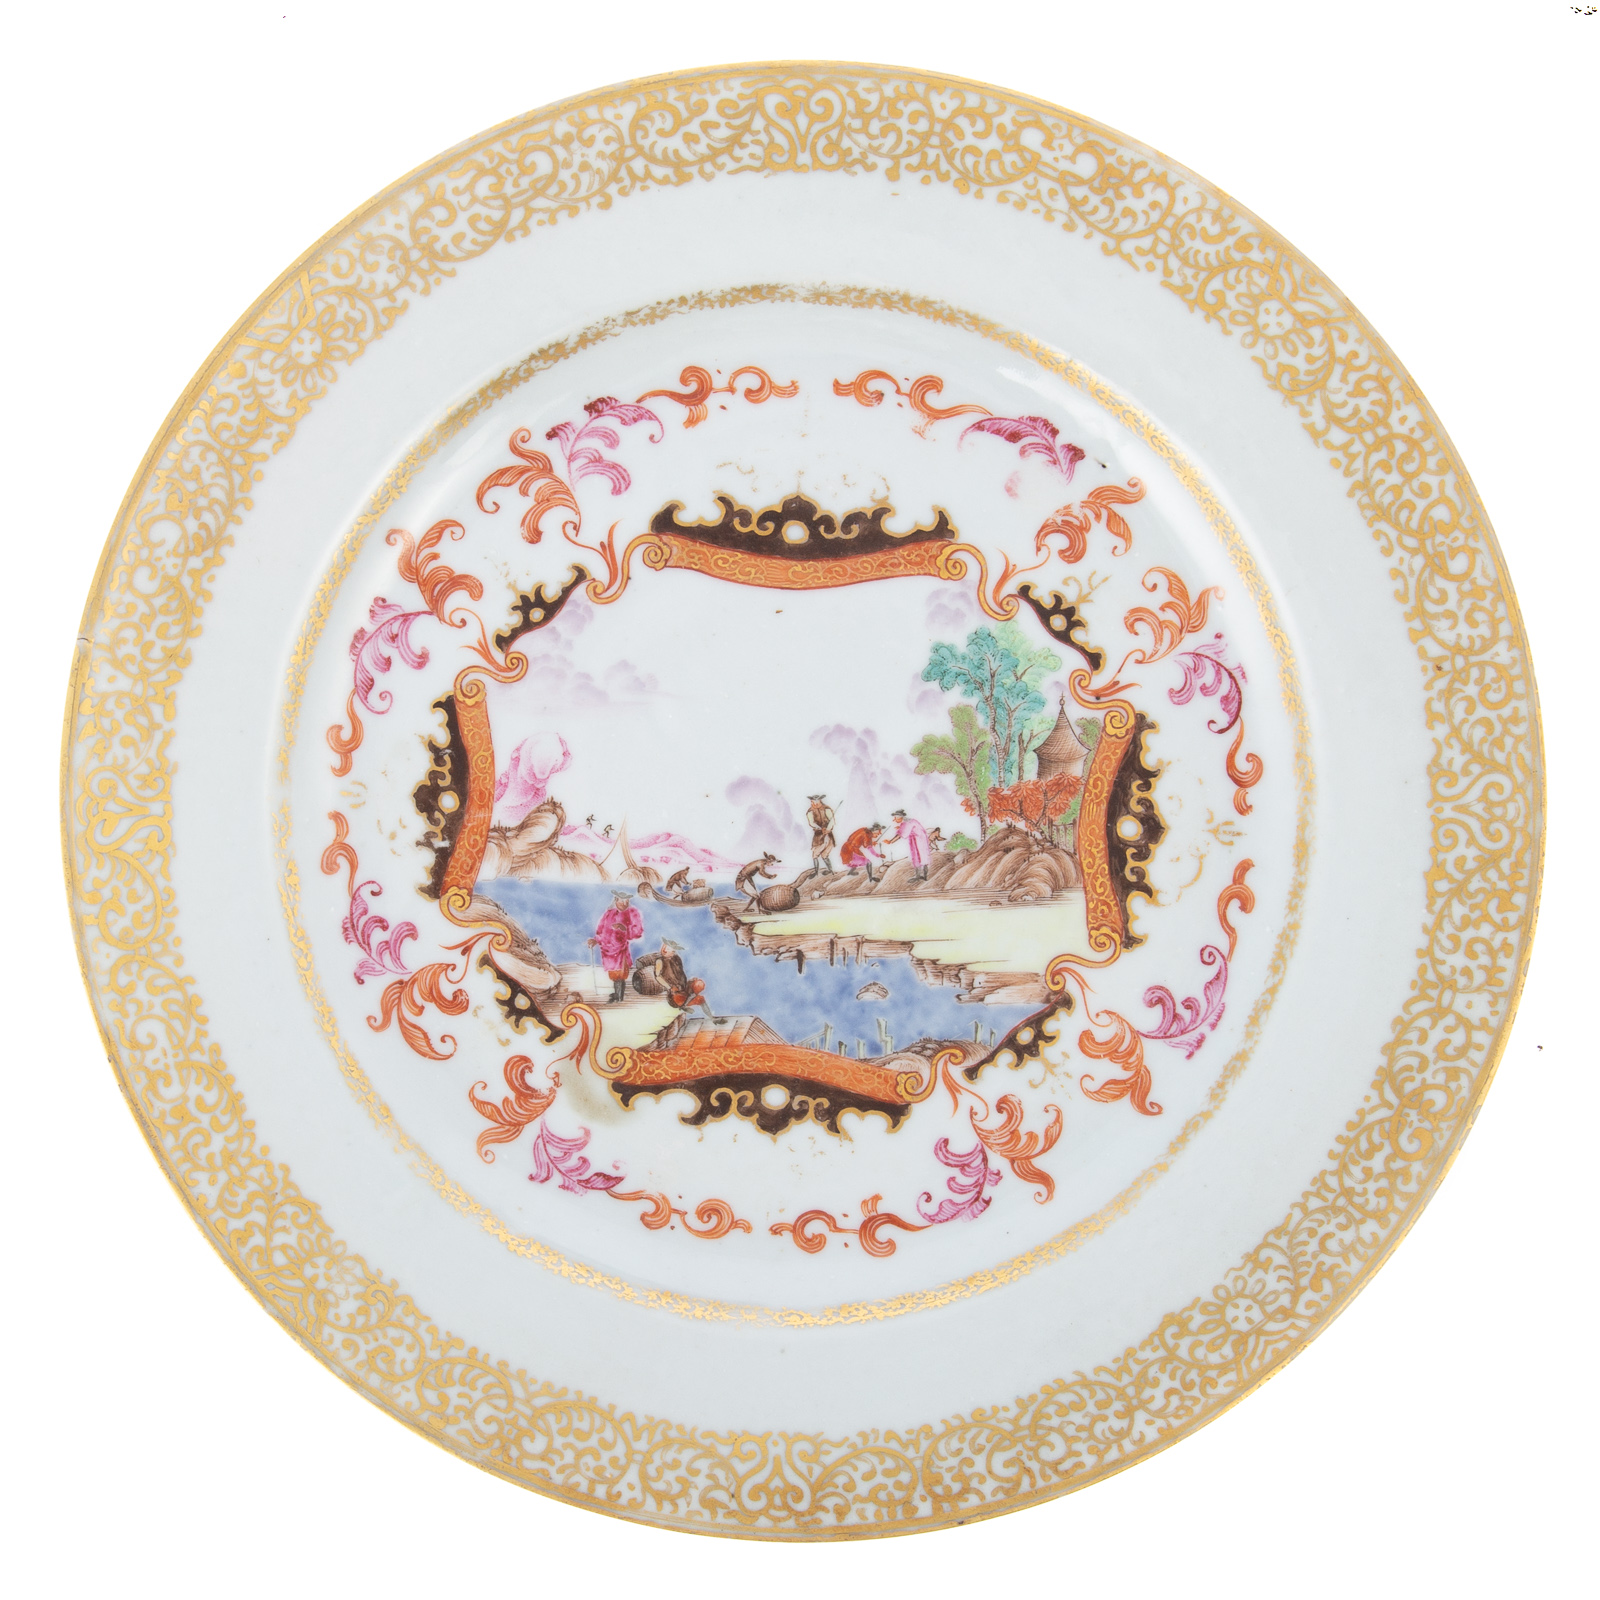 CHINESE EXPORT PLATE IN THE MEISSEN